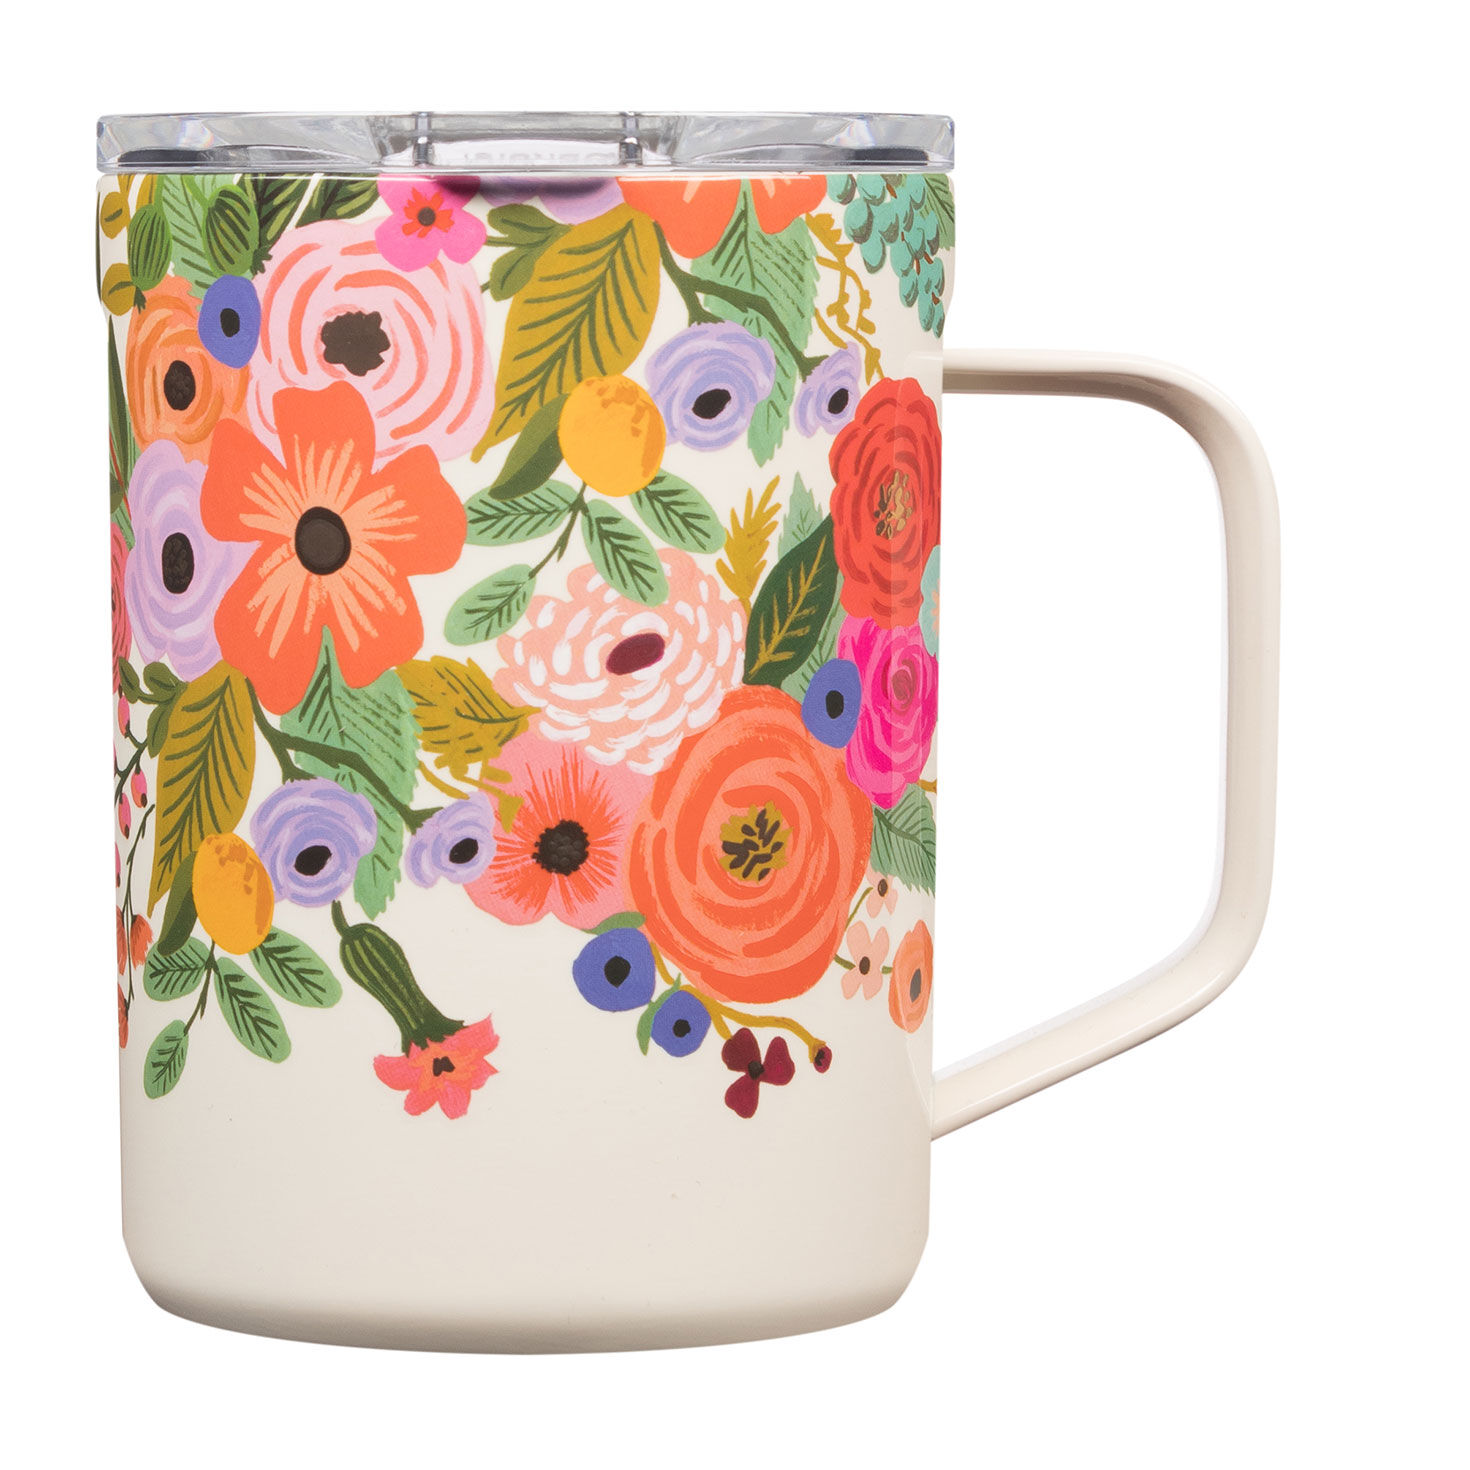 https://www.hallmark.com/dw/image/v2/AALB_PRD/on/demandware.static/-/Sites-hallmark-master/default/dwcbee5bb7/images/finished-goods/products/RP2516GCGP/Cream-Garden-Party-Insulated-16oz.-Mug-With-Lid_RP2516GCGP_01.jpg?sfrm=jpg